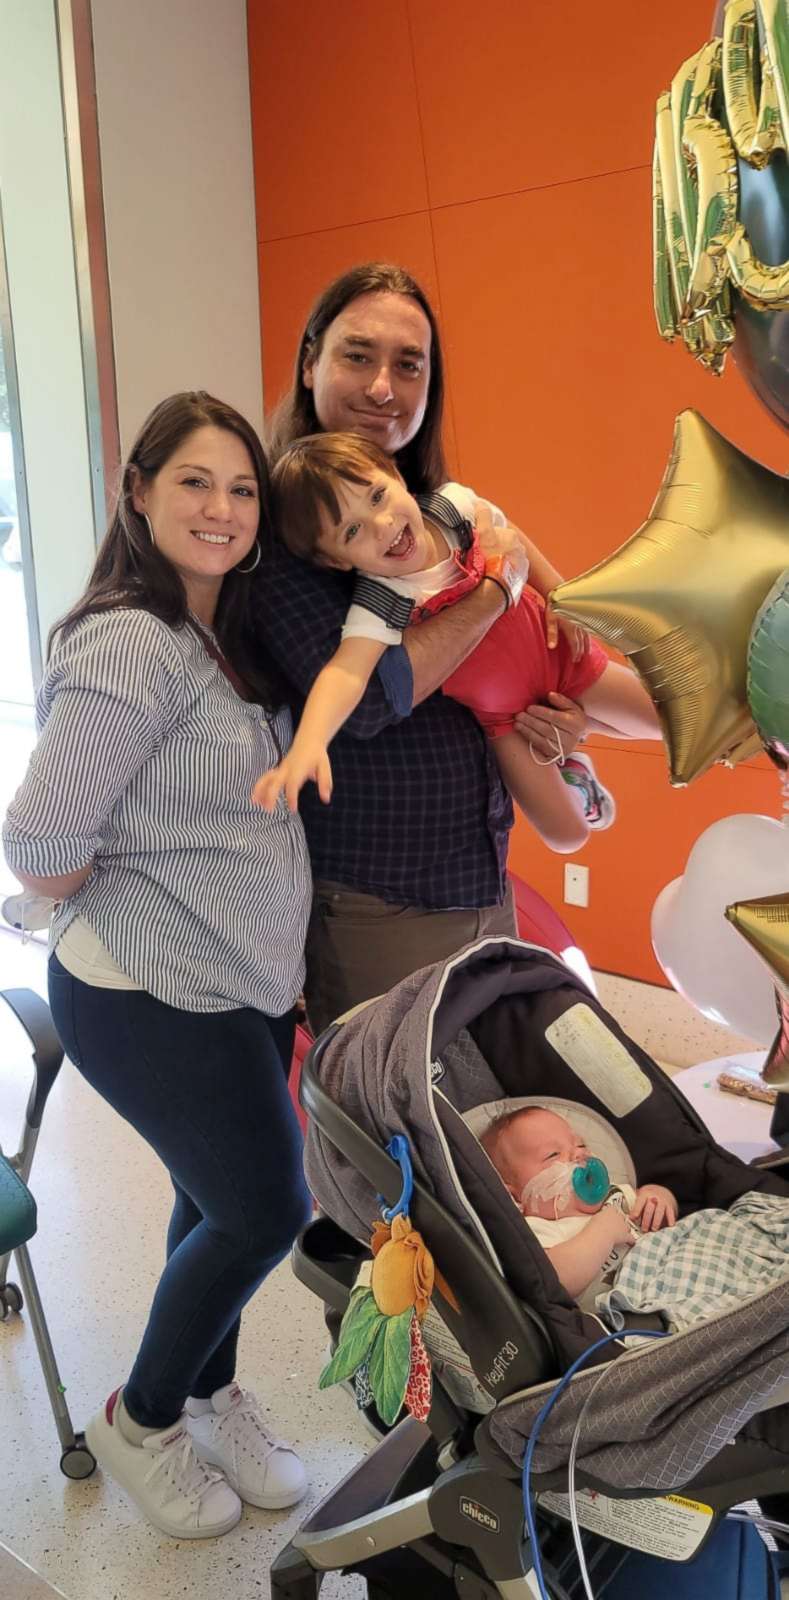 PHOTO: Valerie Kasper poses with her partner Steven and their two children on the day their youngest son, Theodore, went home from the NICU.
